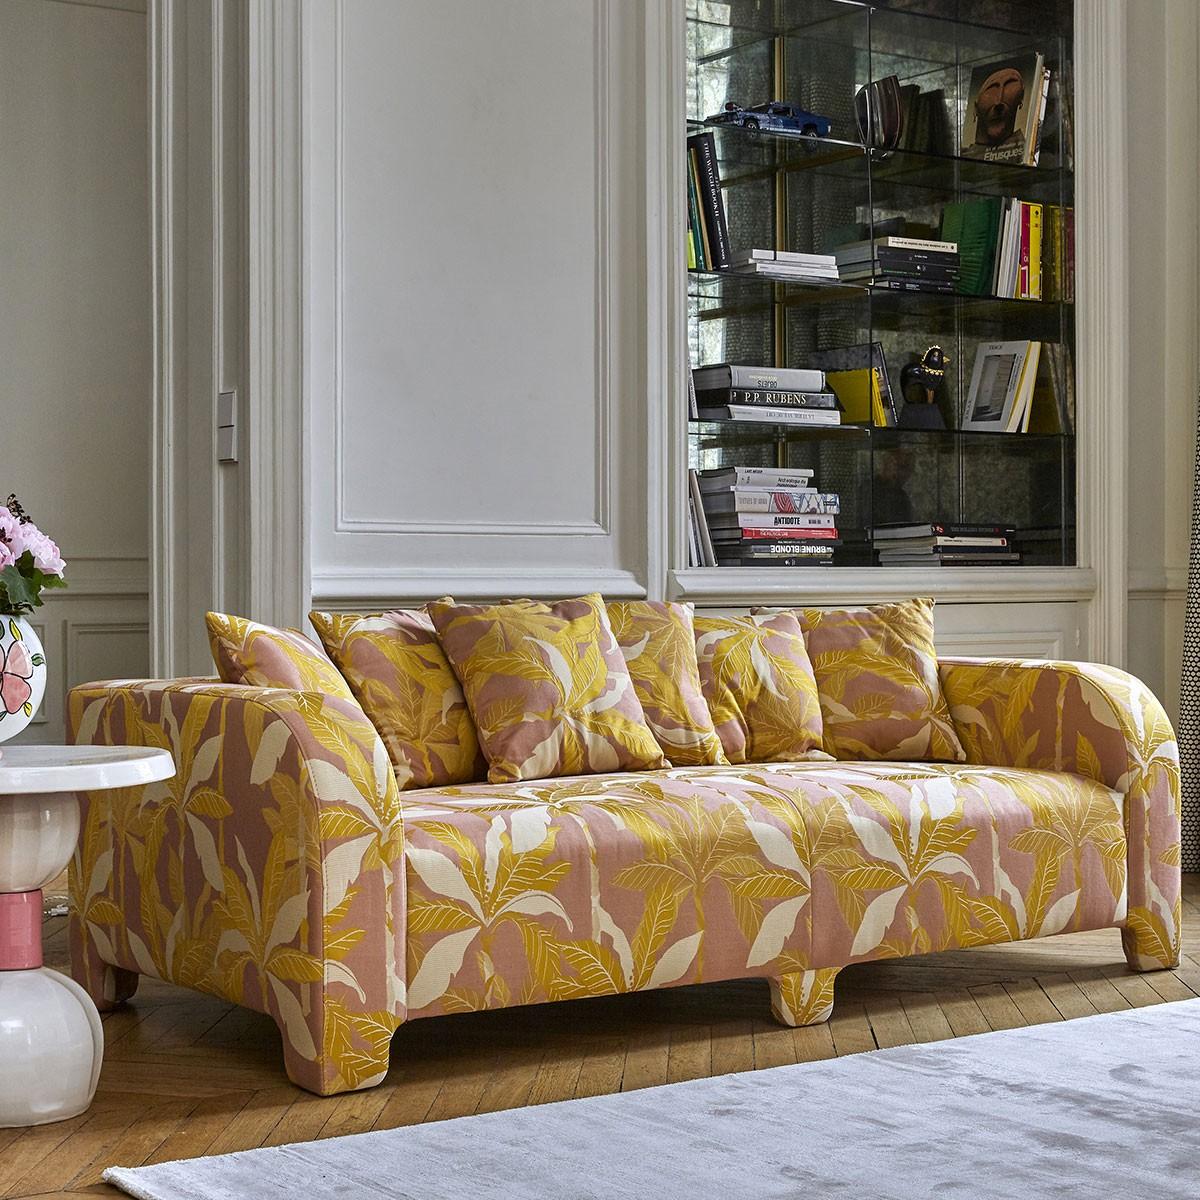 Popus Editions Graziella 4 Seater Sofa in Ciotello Athena Loop Yarn Upholstery In New Condition For Sale In Paris, FR